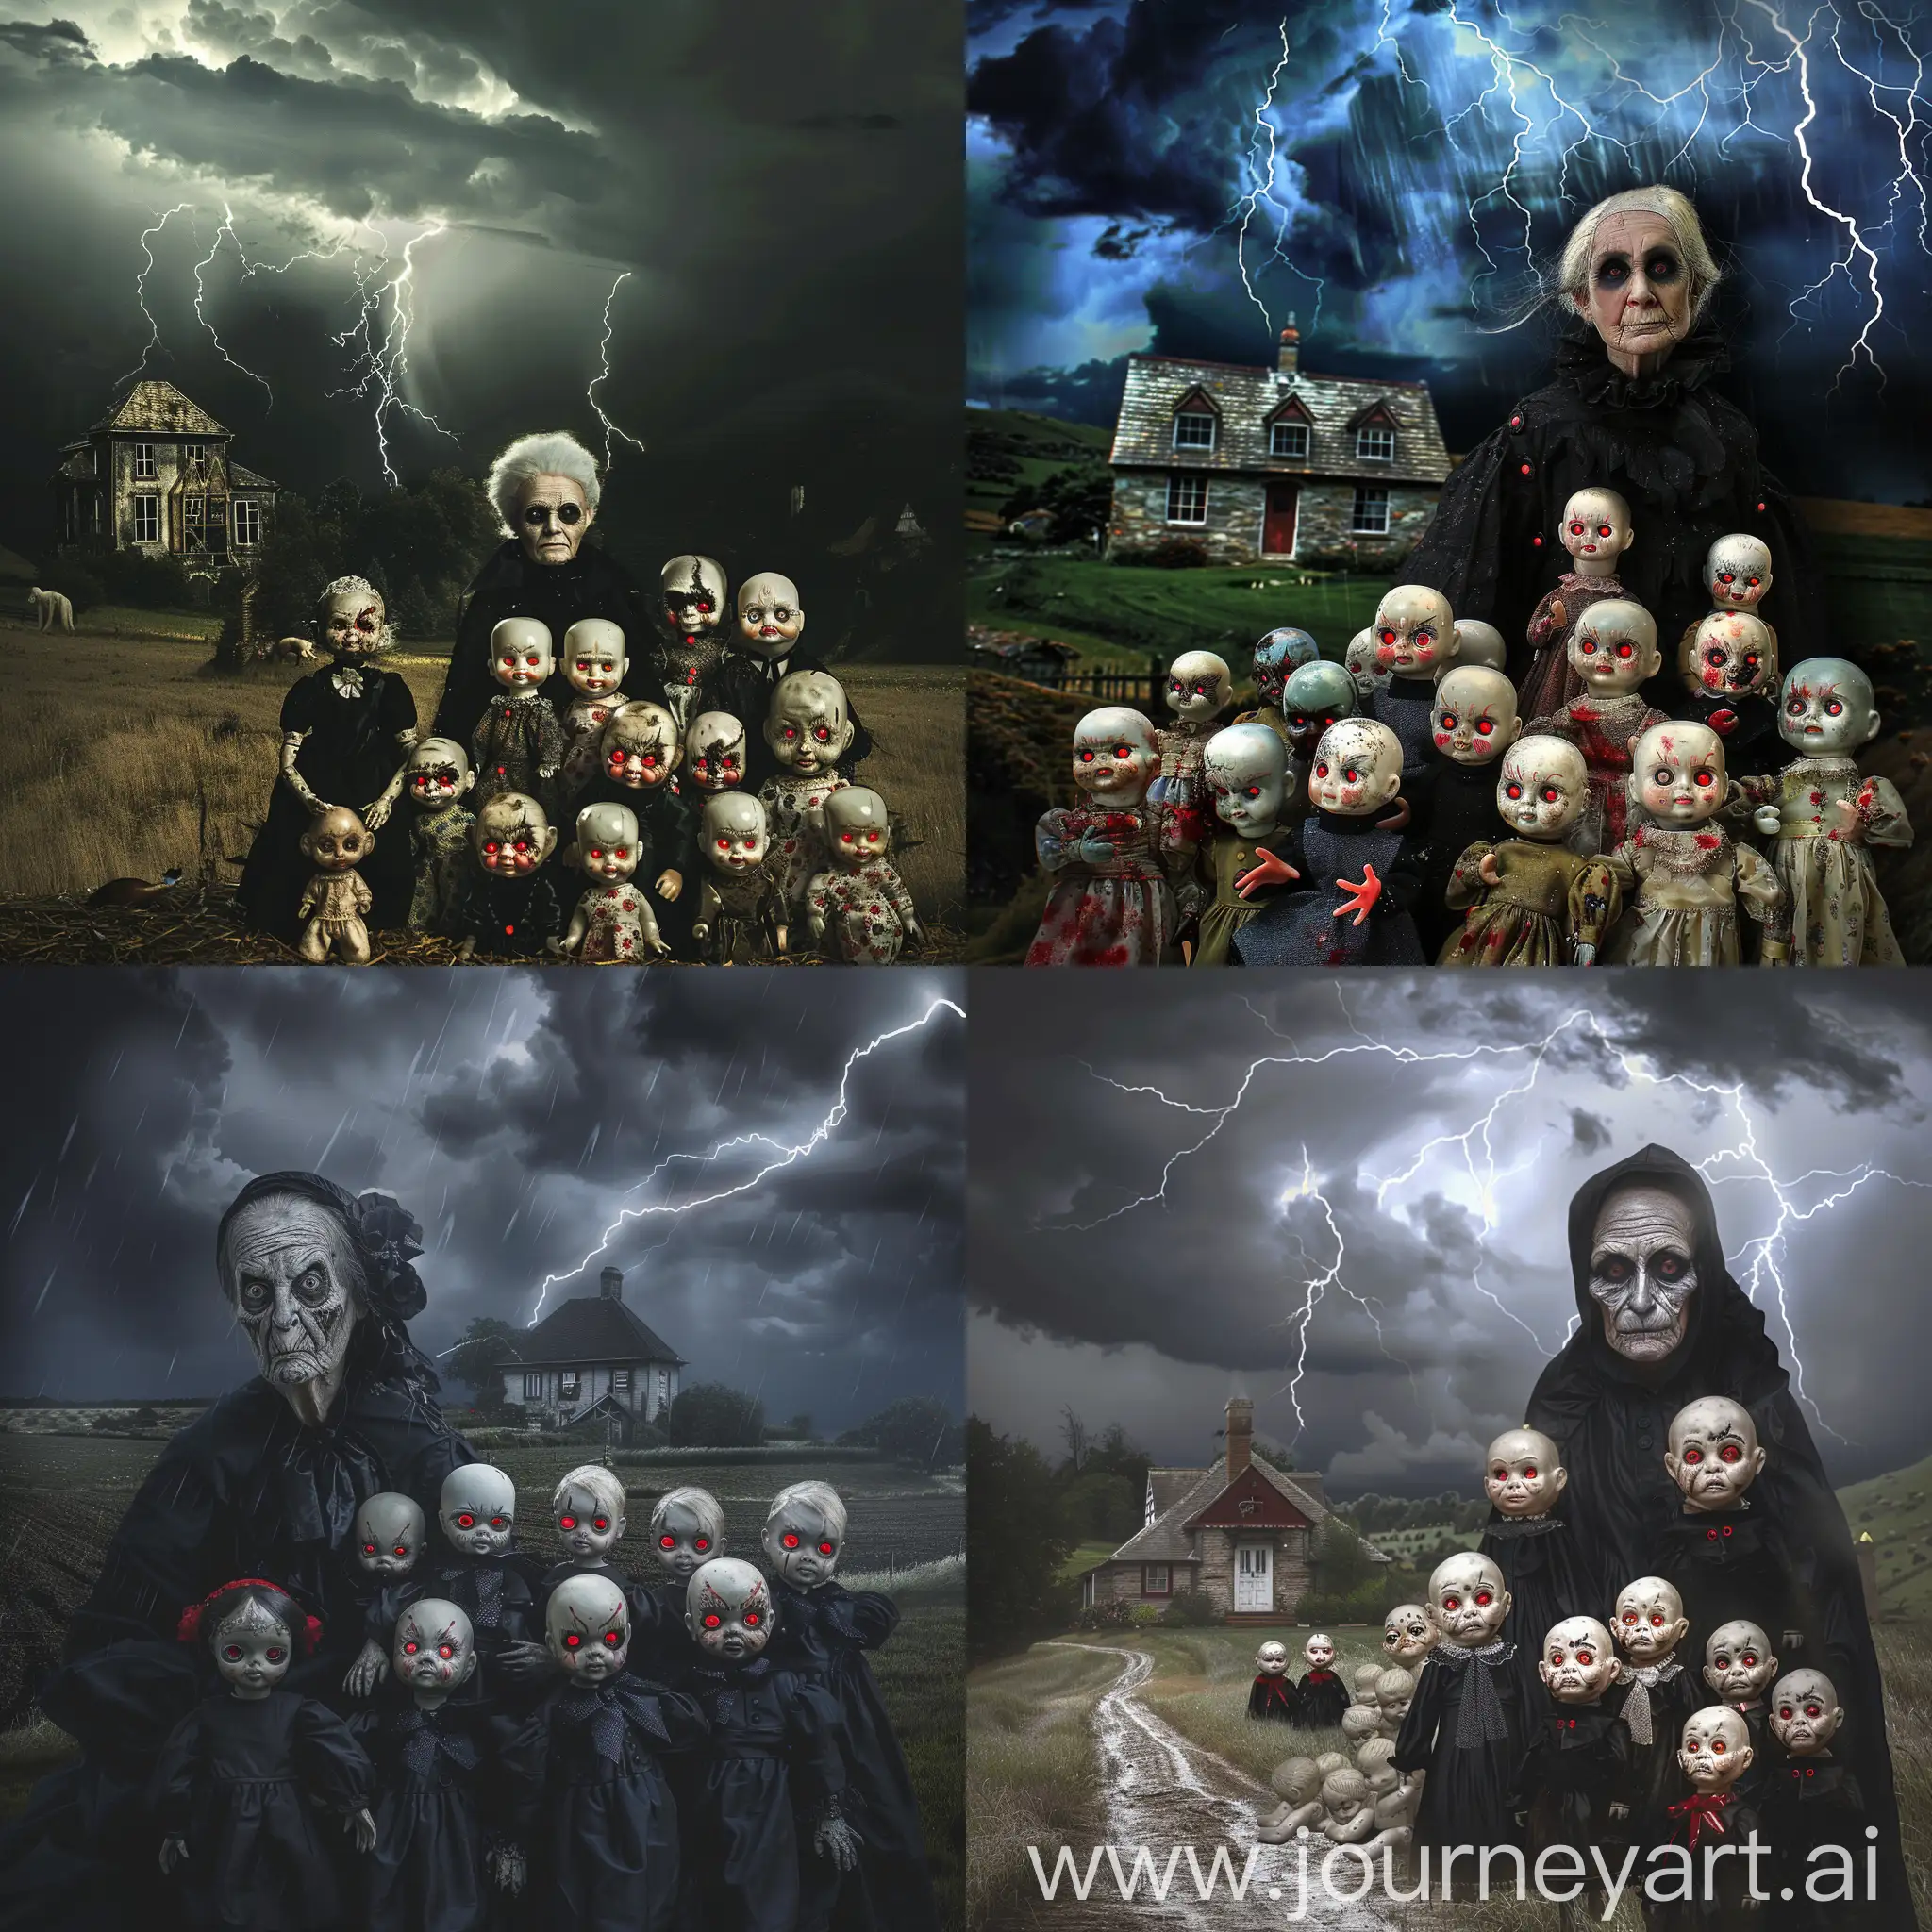 An old woman dressed in black with black eyes with ten creepy porcelain dolls with red eyes standing next to the old woman on a stormy night with lightning in the sky. Add a cottage in the background.